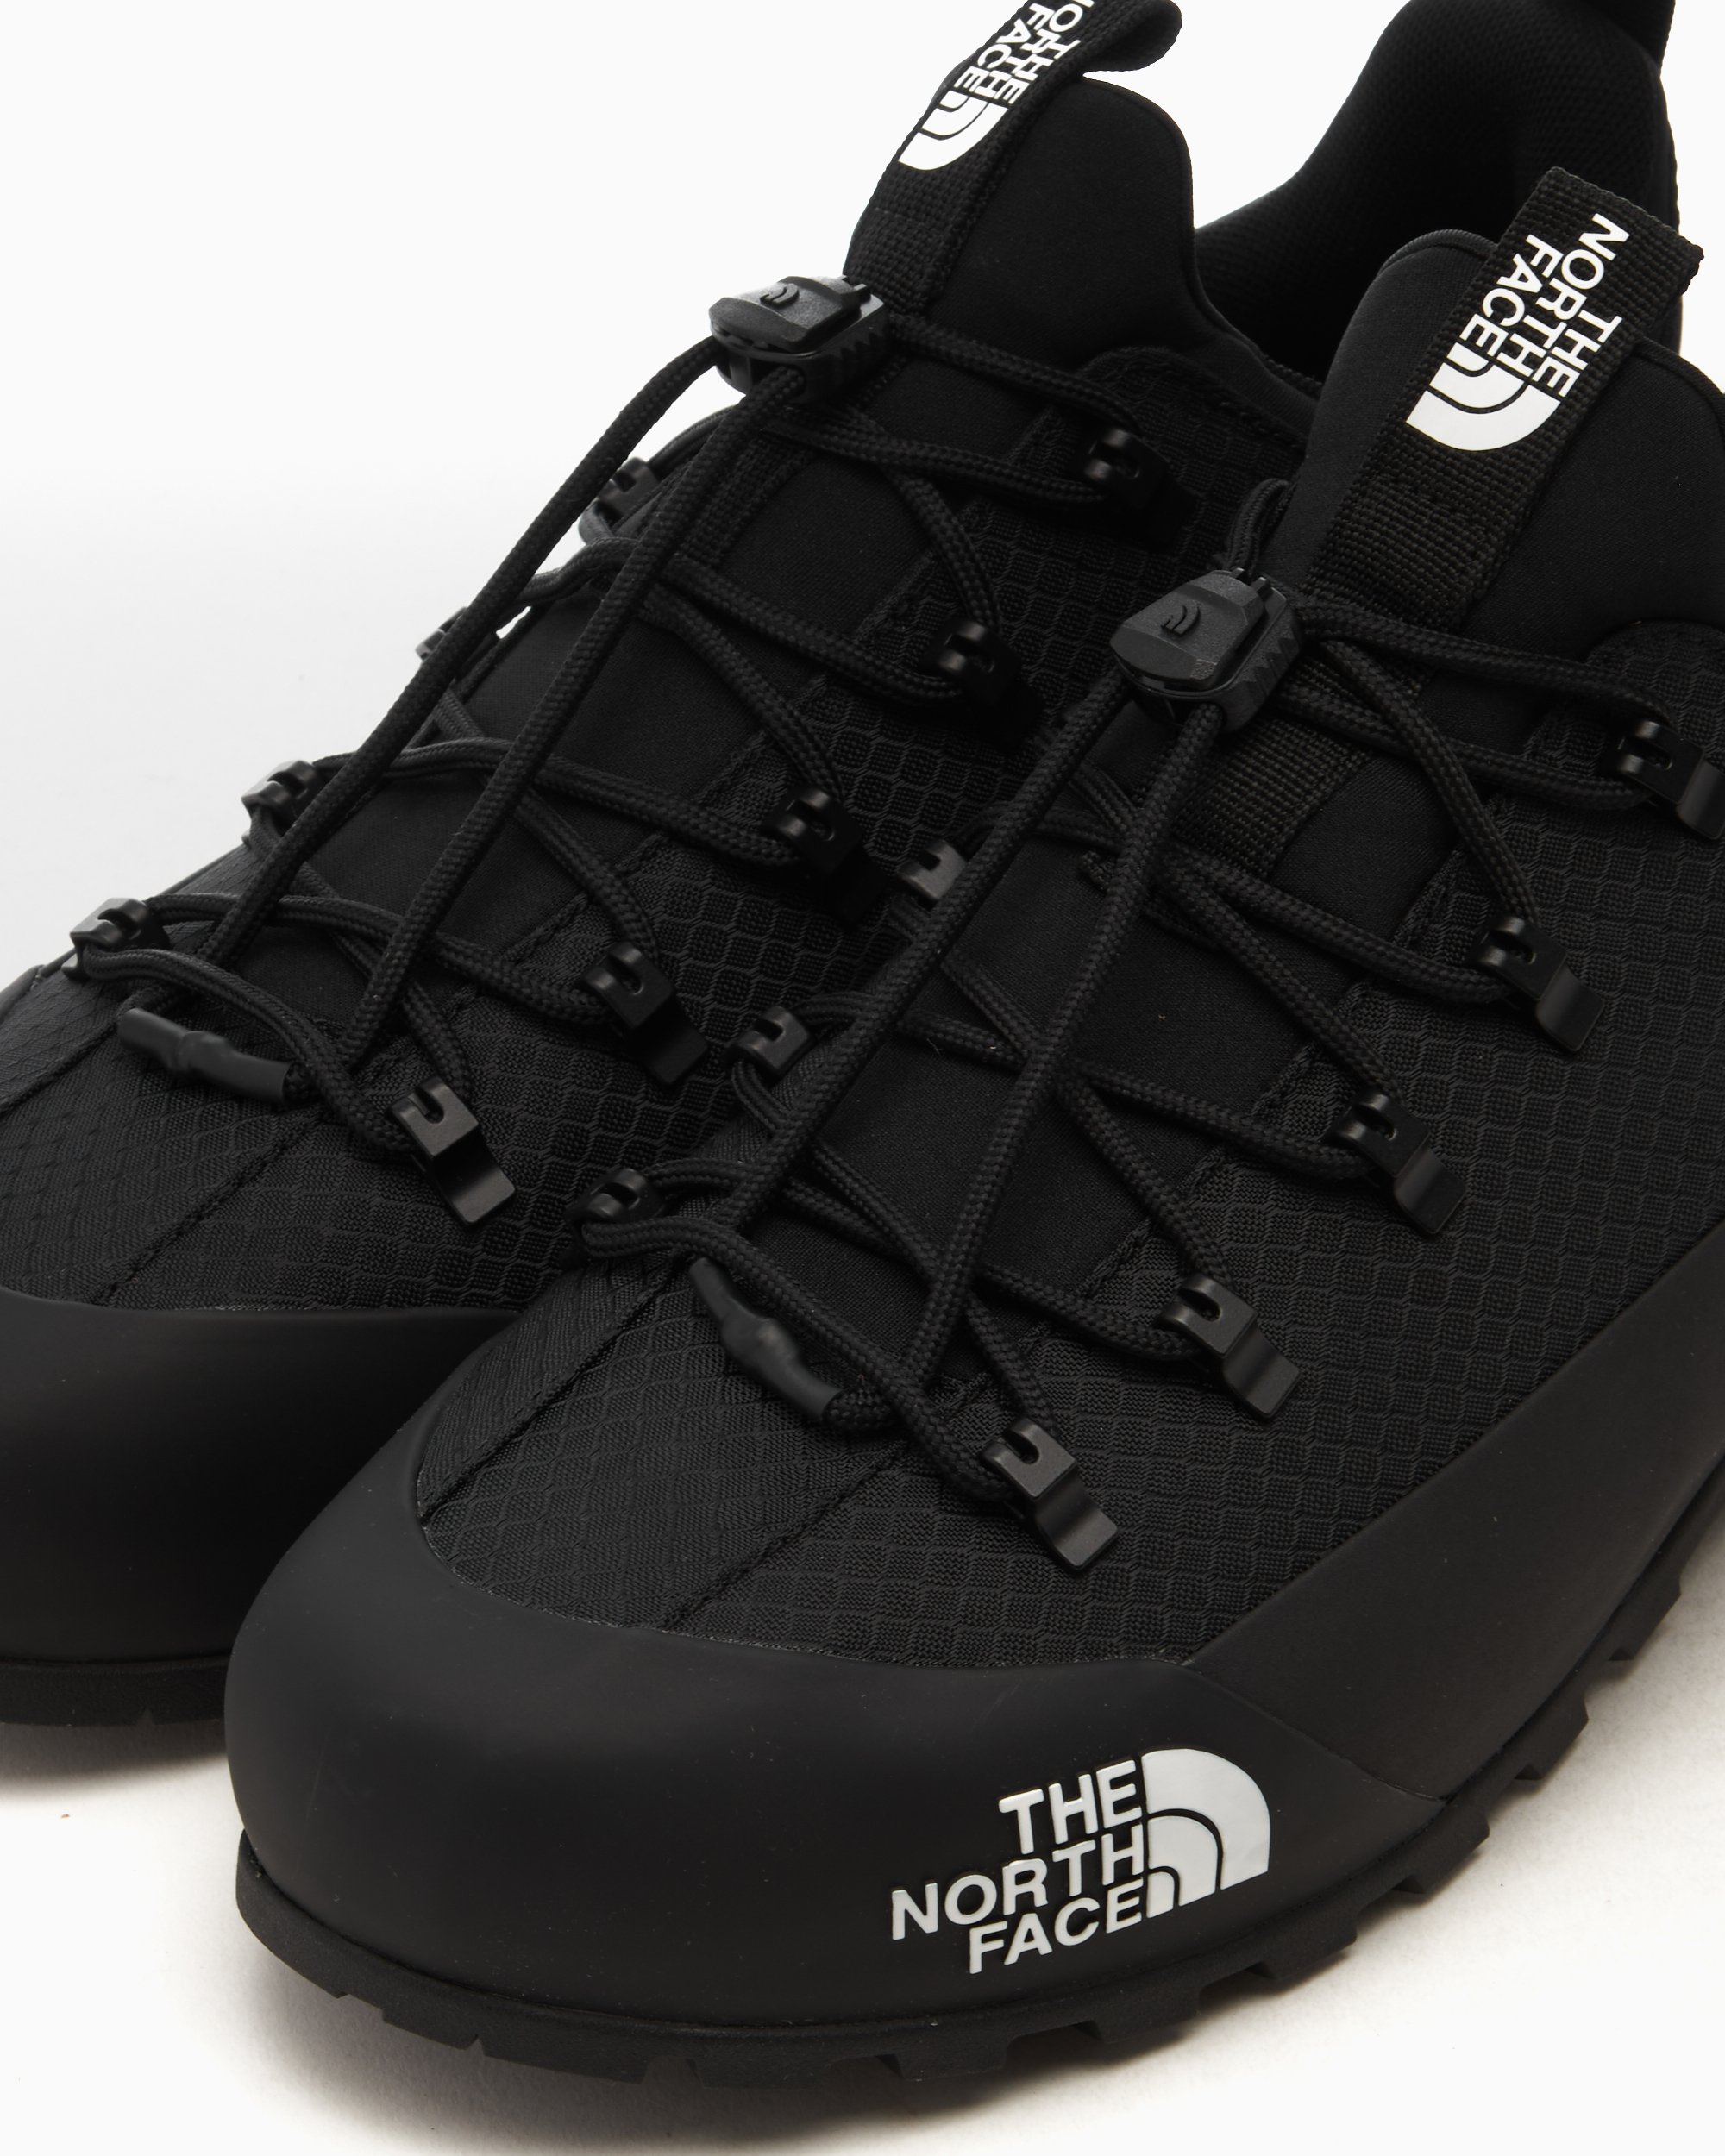 The North Face Glenclyffe Low Street Boots Vibram Negro 